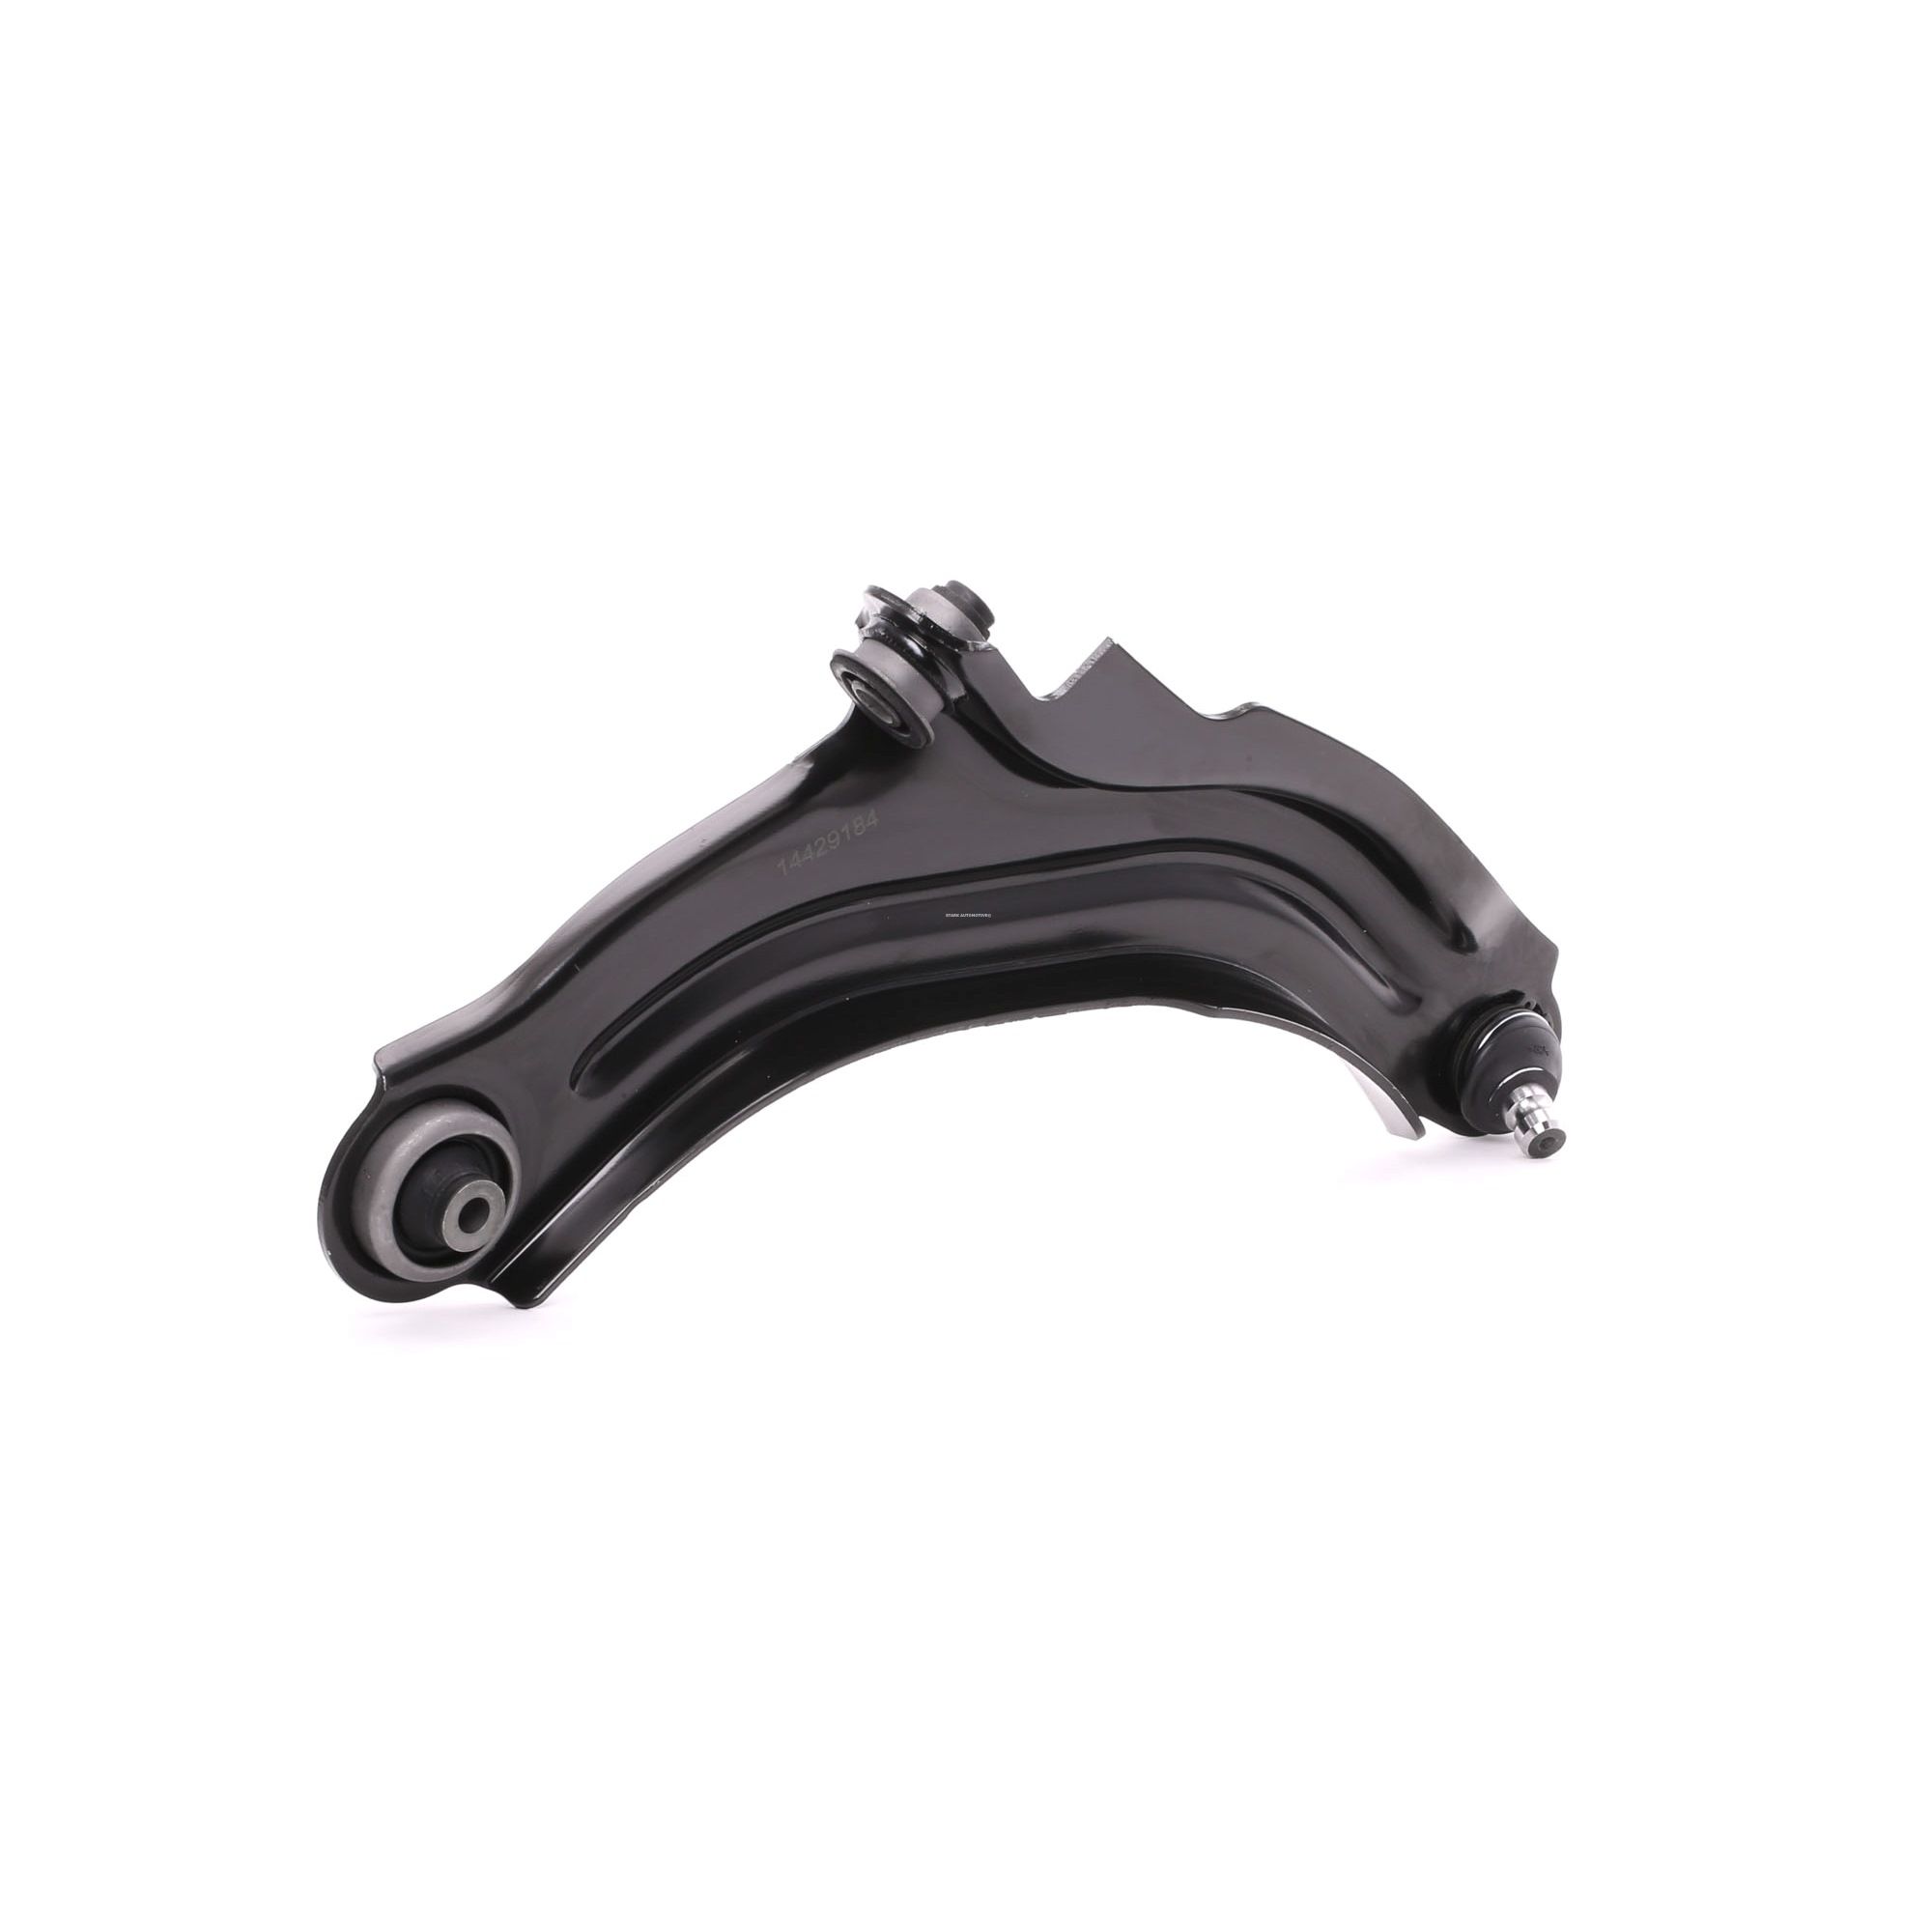 STARK SKCA-0051143 Suspension arm Lower, Front Axle Right, Control Arm, Sheet Steel, Cone Size: 18 mm, Push Rod